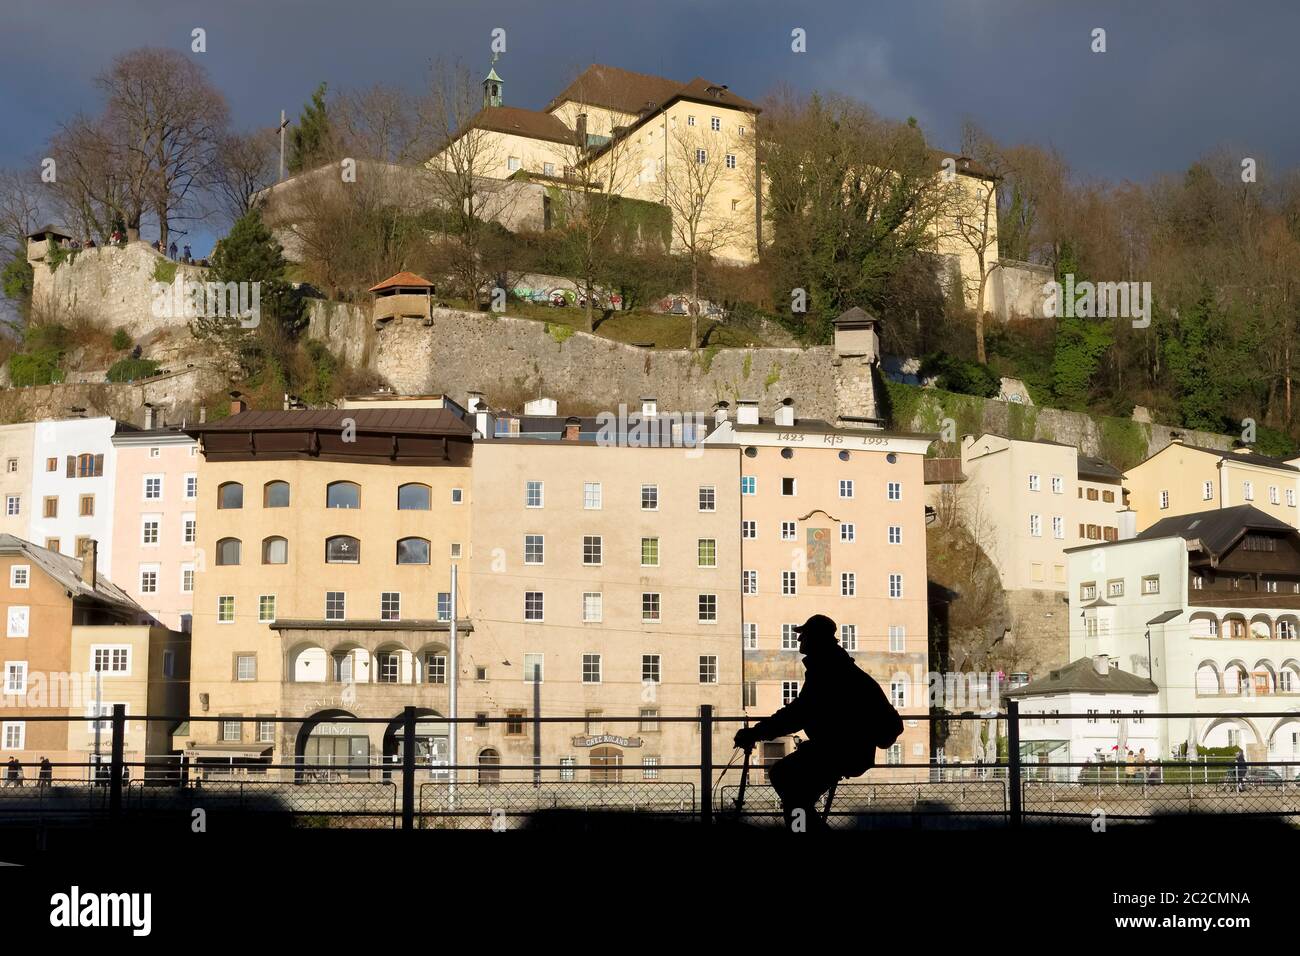 View of the Capuchin Monastery in Salzburg including the surrounding houses from the street across the river with a silhouette of cyclist. Stock Photo